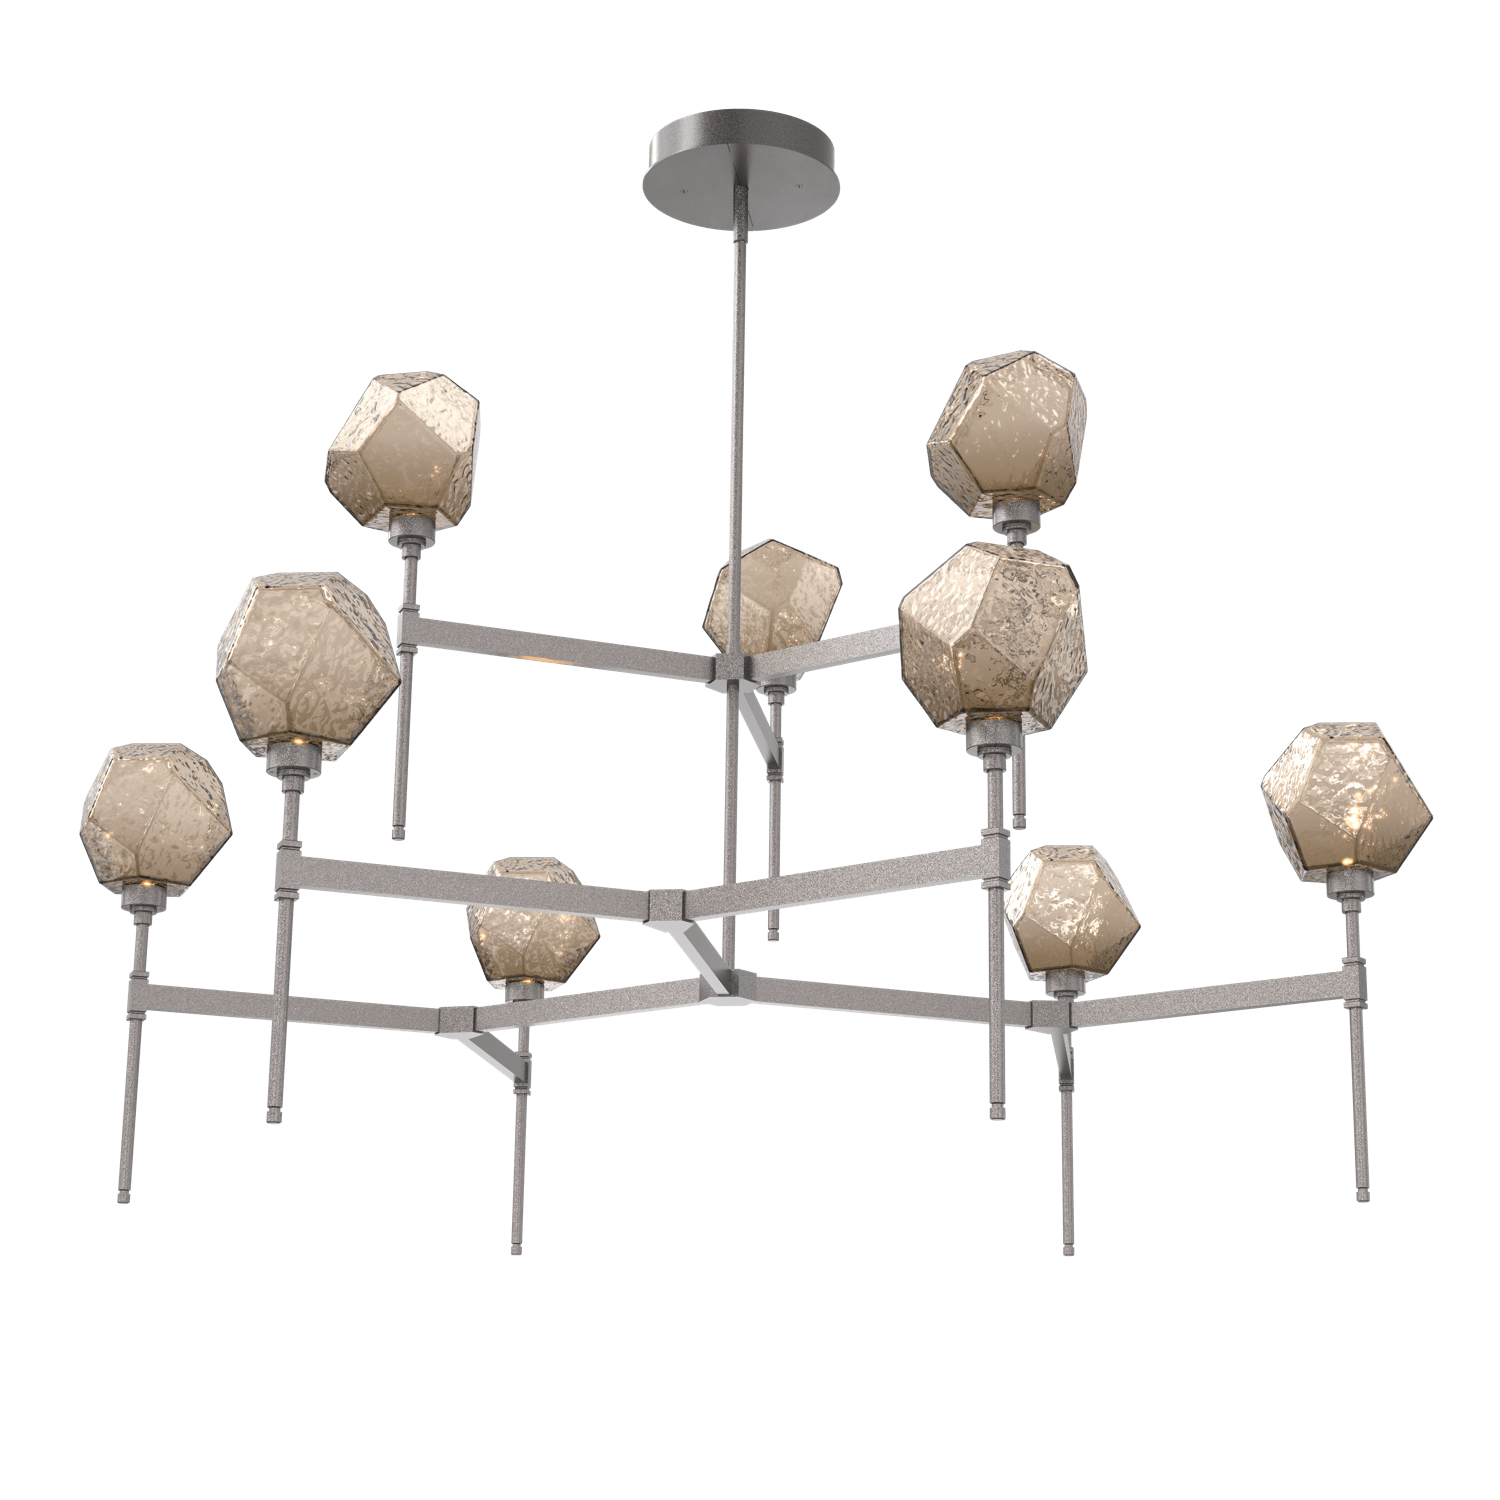 CHB0039-55-GP-B-Hammerton-Studio-Gem-round-two-tier-belvedere-chandelier-with-graphite-finish-and-bronze-blown-glass-shades-and-LED-lamping